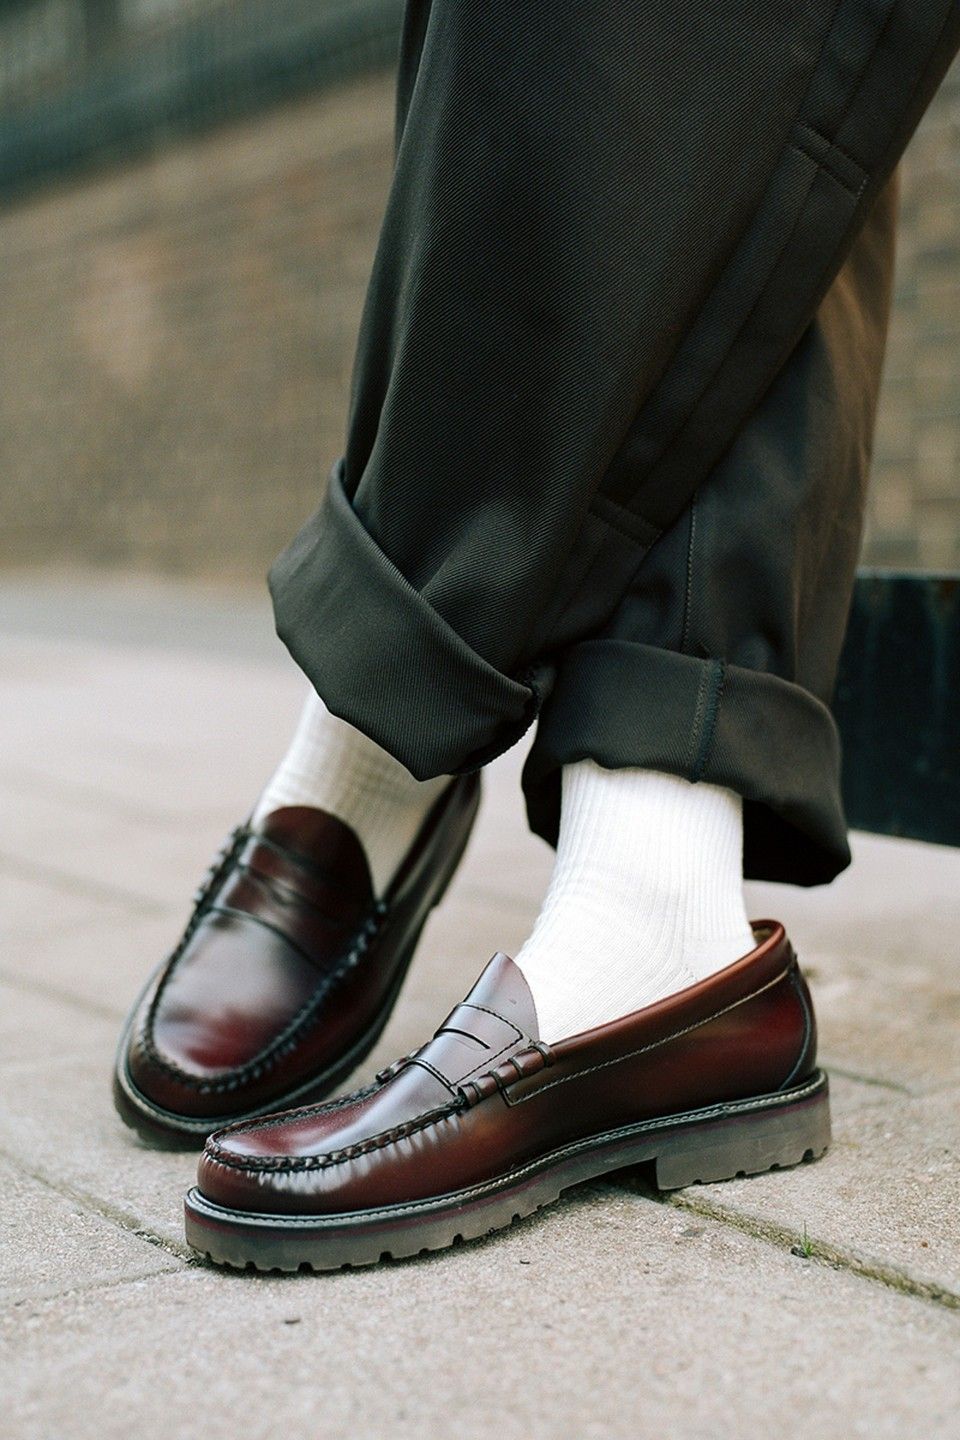 Loafers For Men: Classic Footwear for Timeless Style